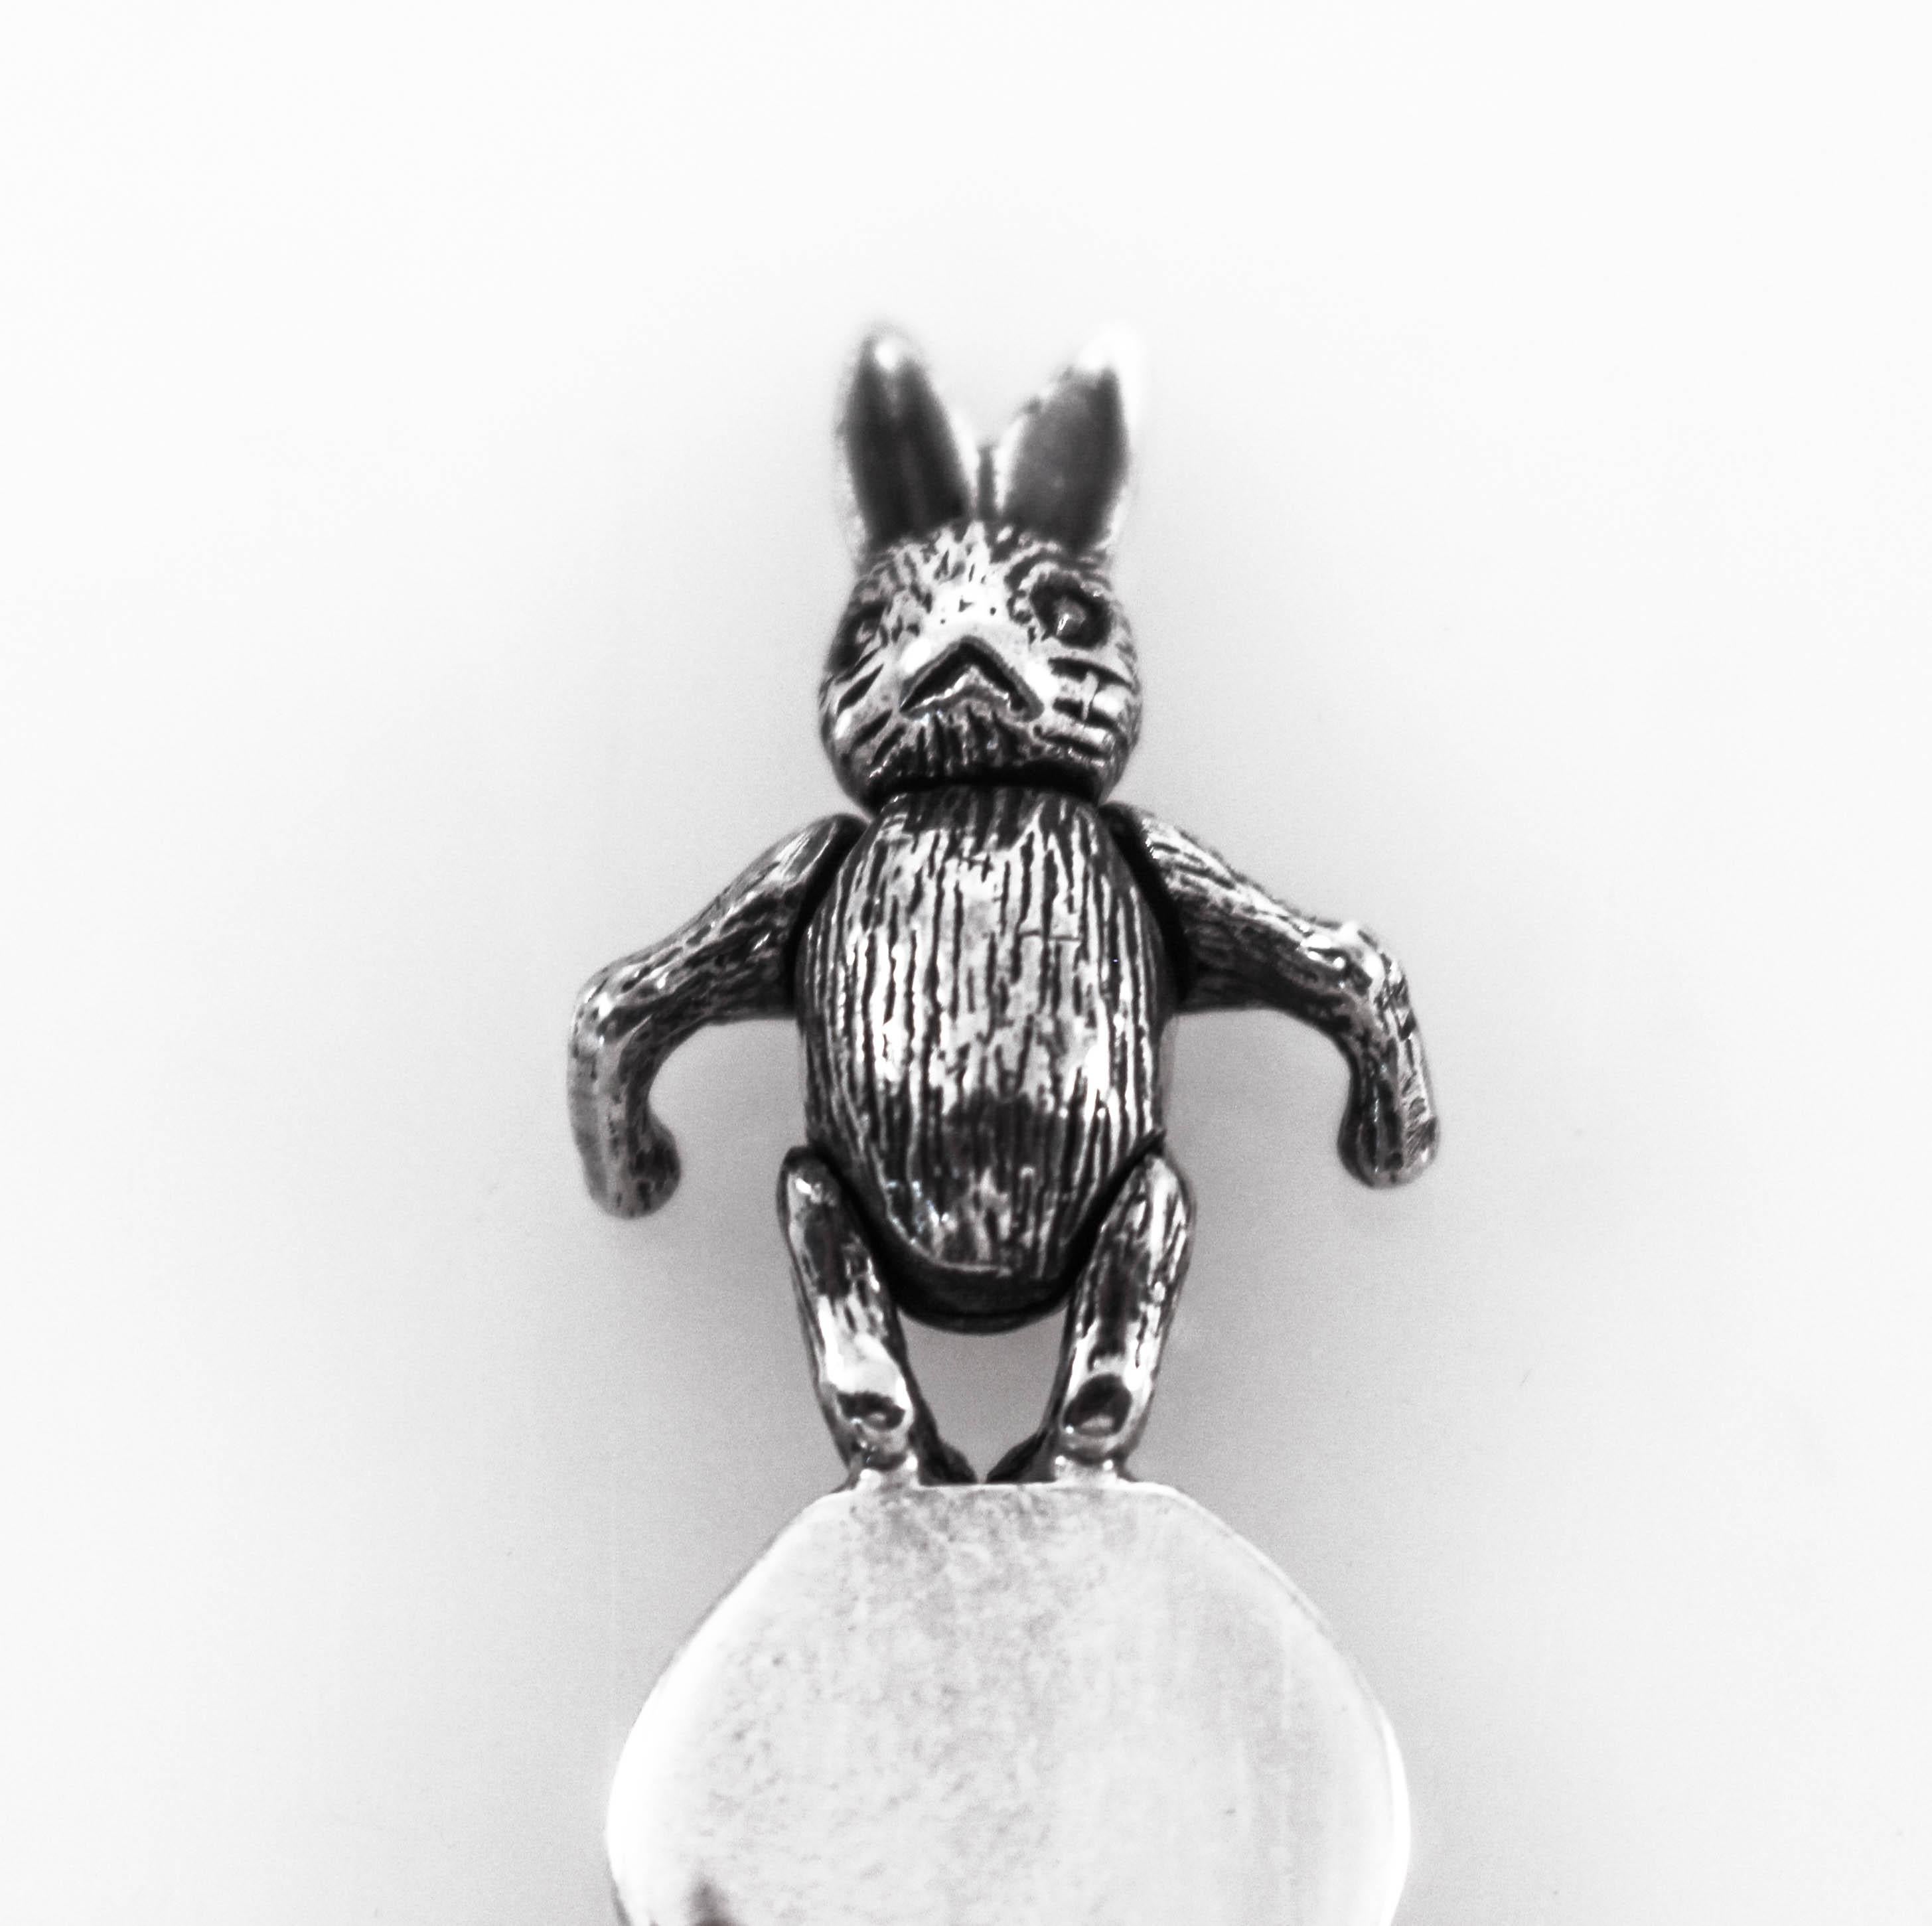 Offering this sterling silver rabbit bookmark. The rabbits head and hands move, so you can adjust them. The bunny is perched on top of the bookmark so even when the book is closed, you still see it. No more folding pages or losing your place, this